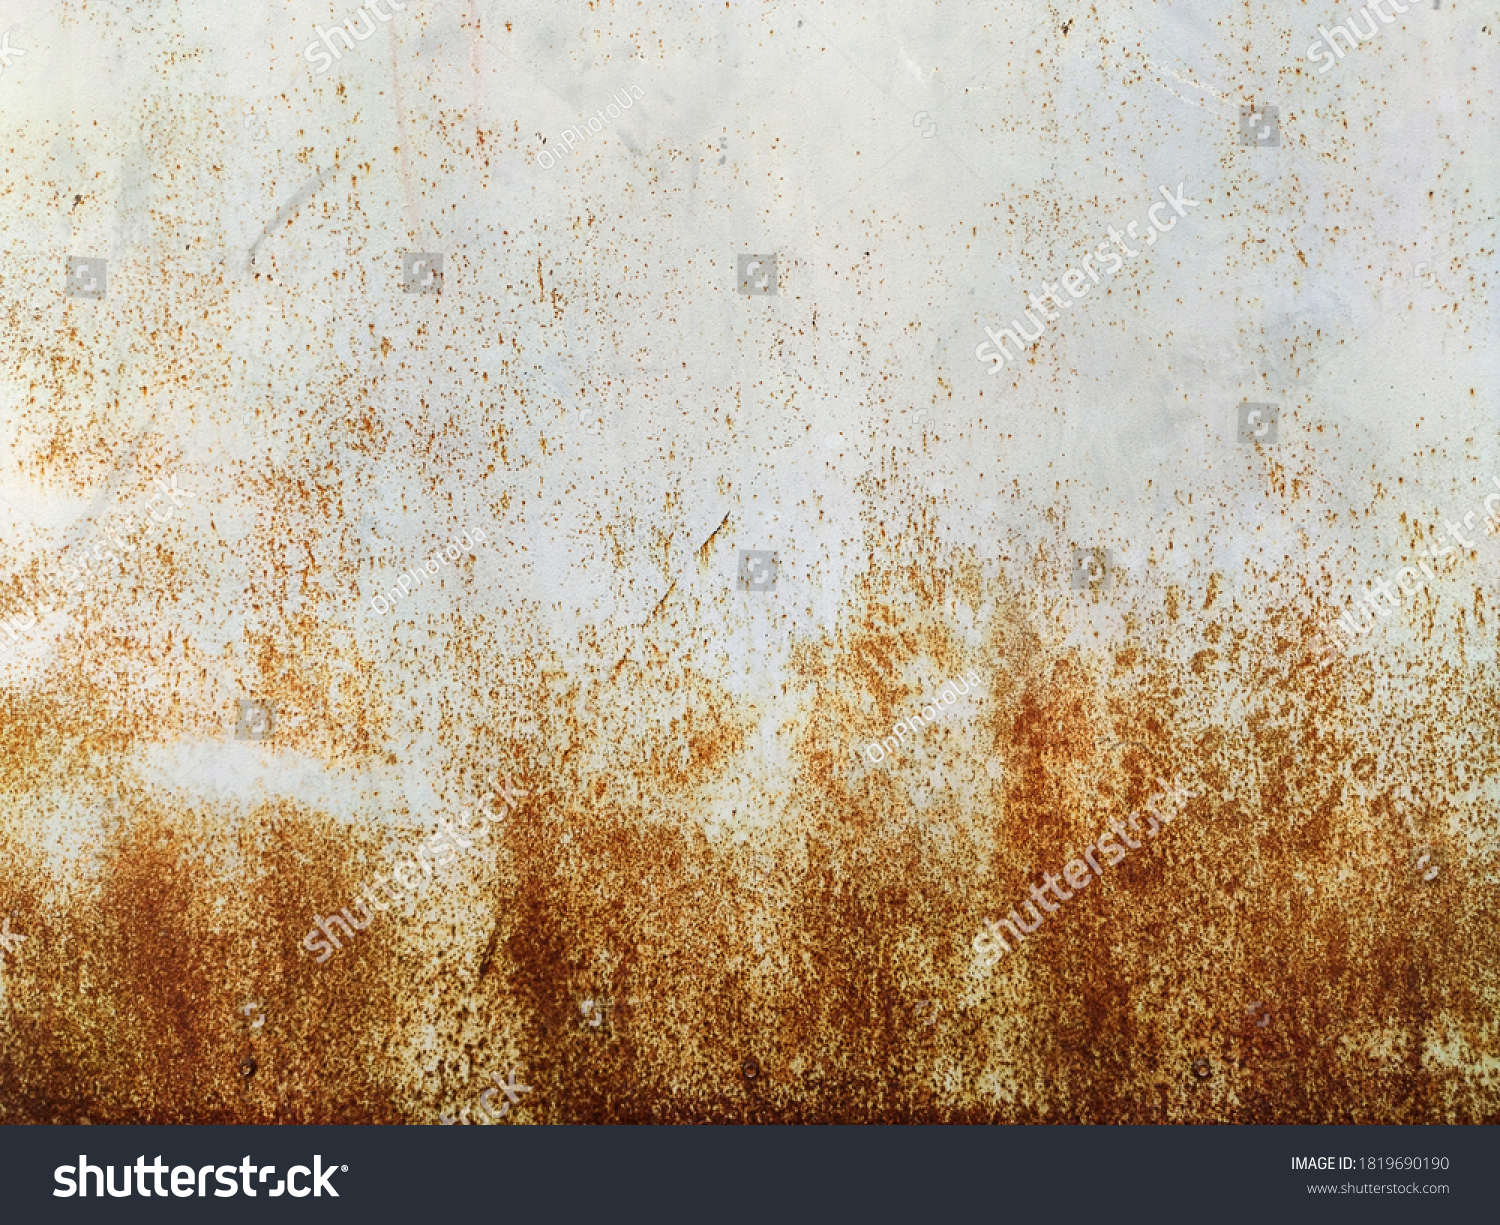 Corroded metal background. Rusted grey painted metal wall. Rusty metal background with streaks of rust. Rust stains. The metal surface rusted spots. Rystycorrosion. #1819690190